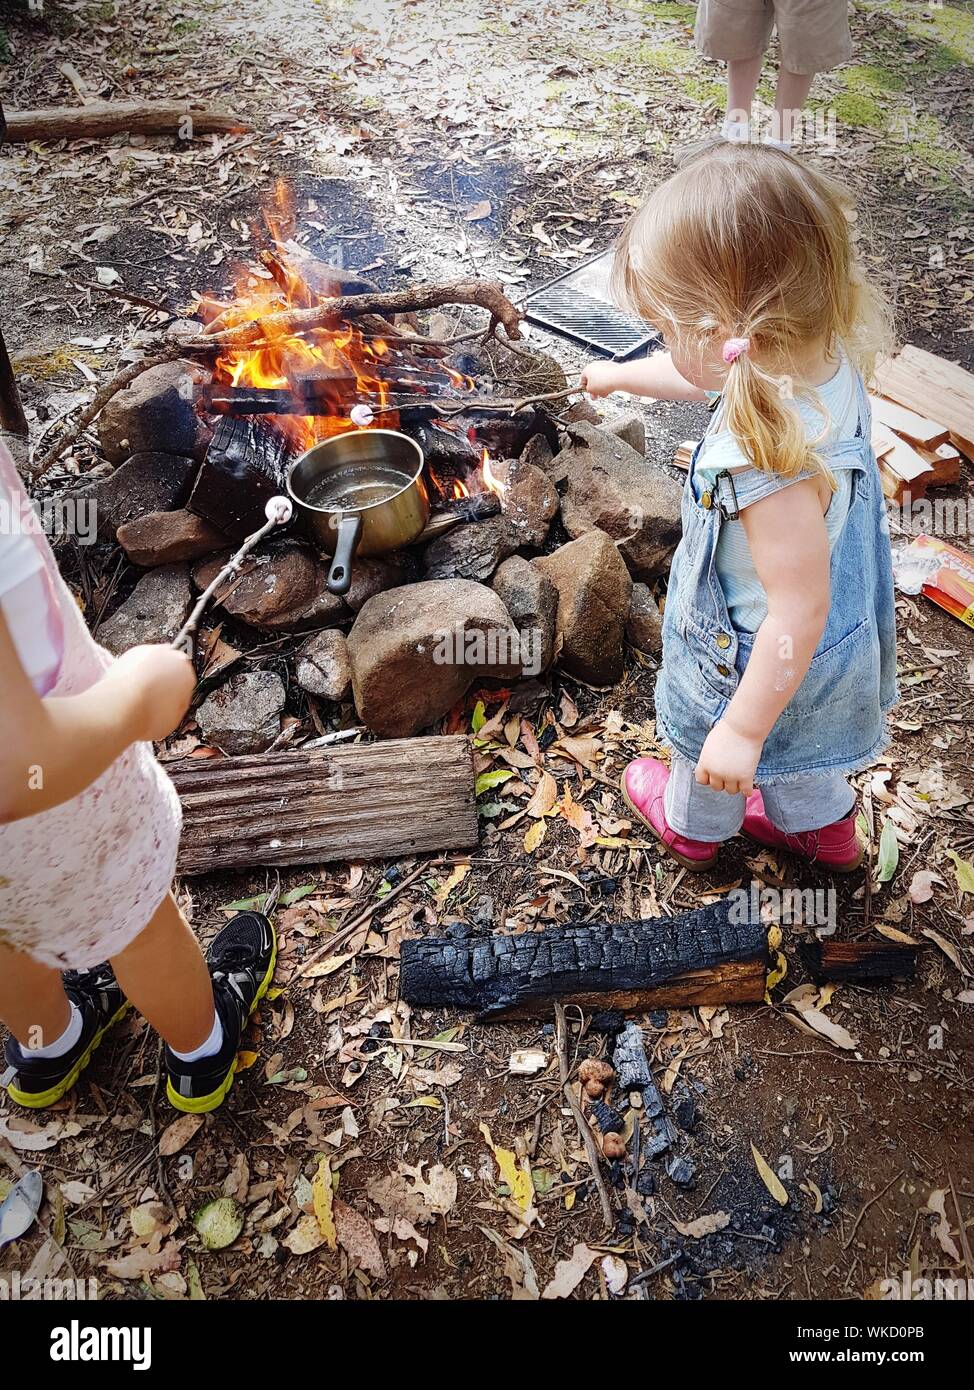 High Angle View Of Siblings Roasting Marshmallows At Campfire On Field Stock Photo